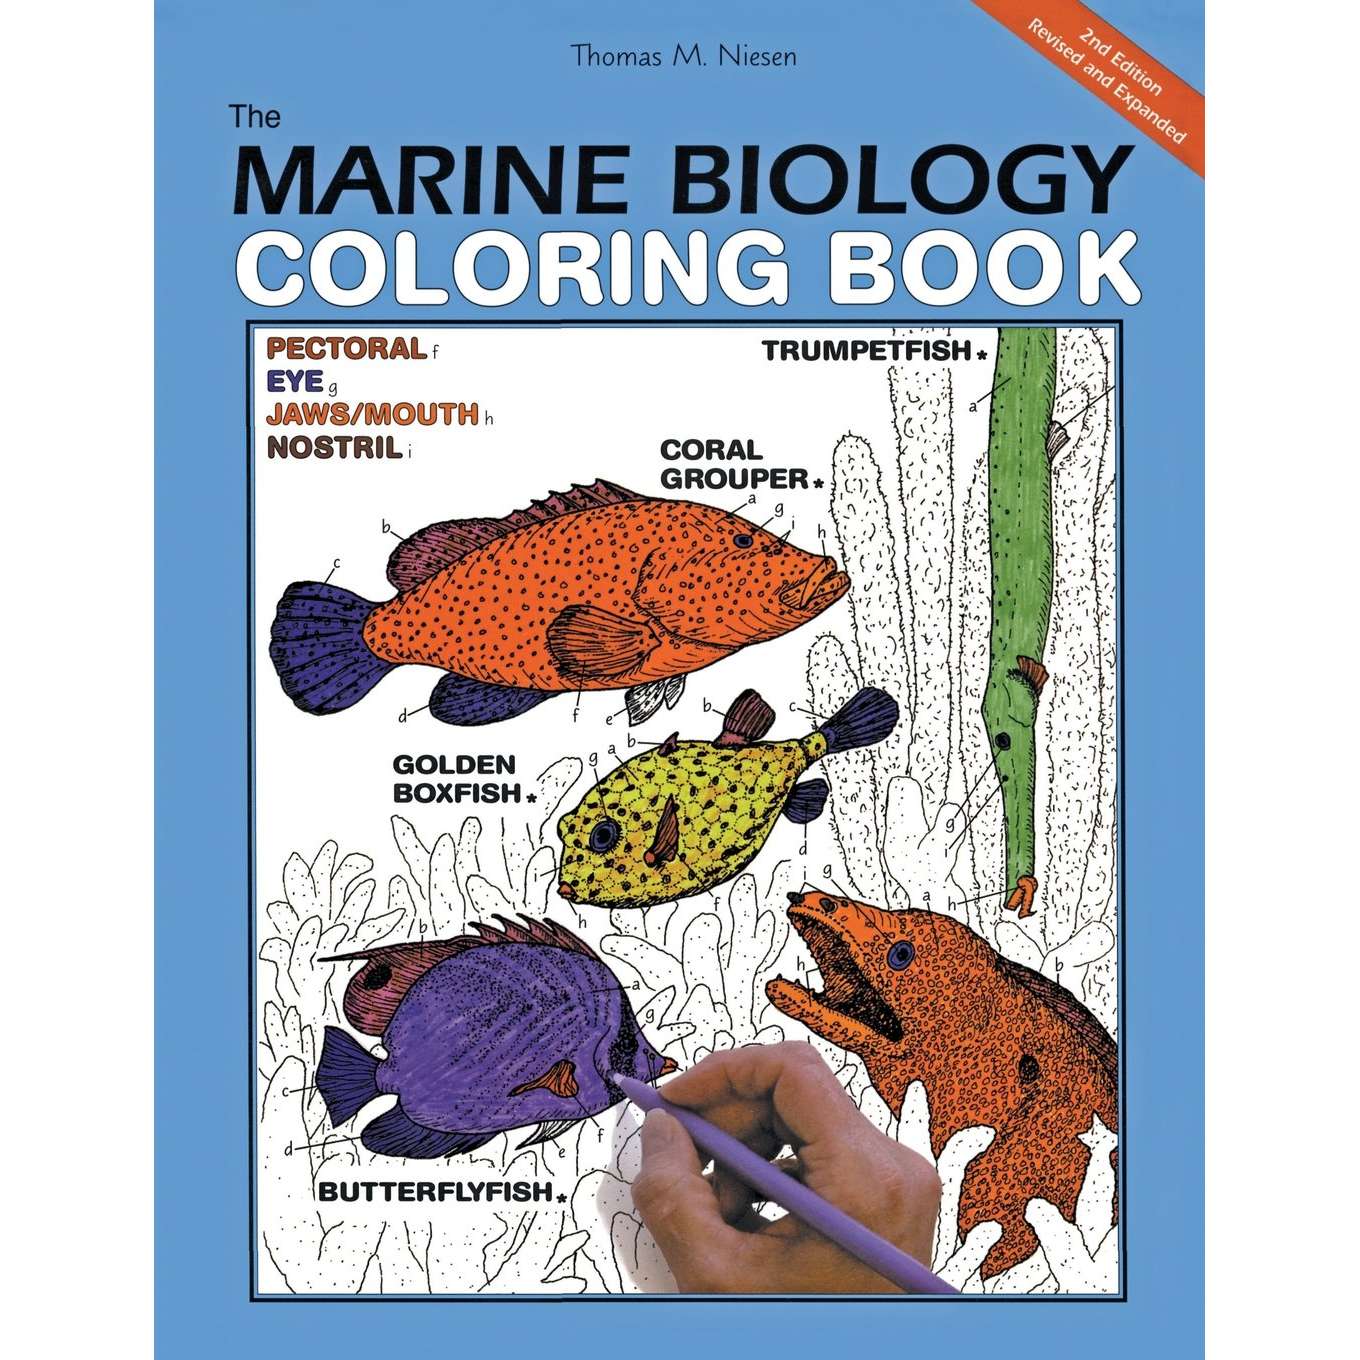 The Marine Biology Coloring Book, 2e [Book]